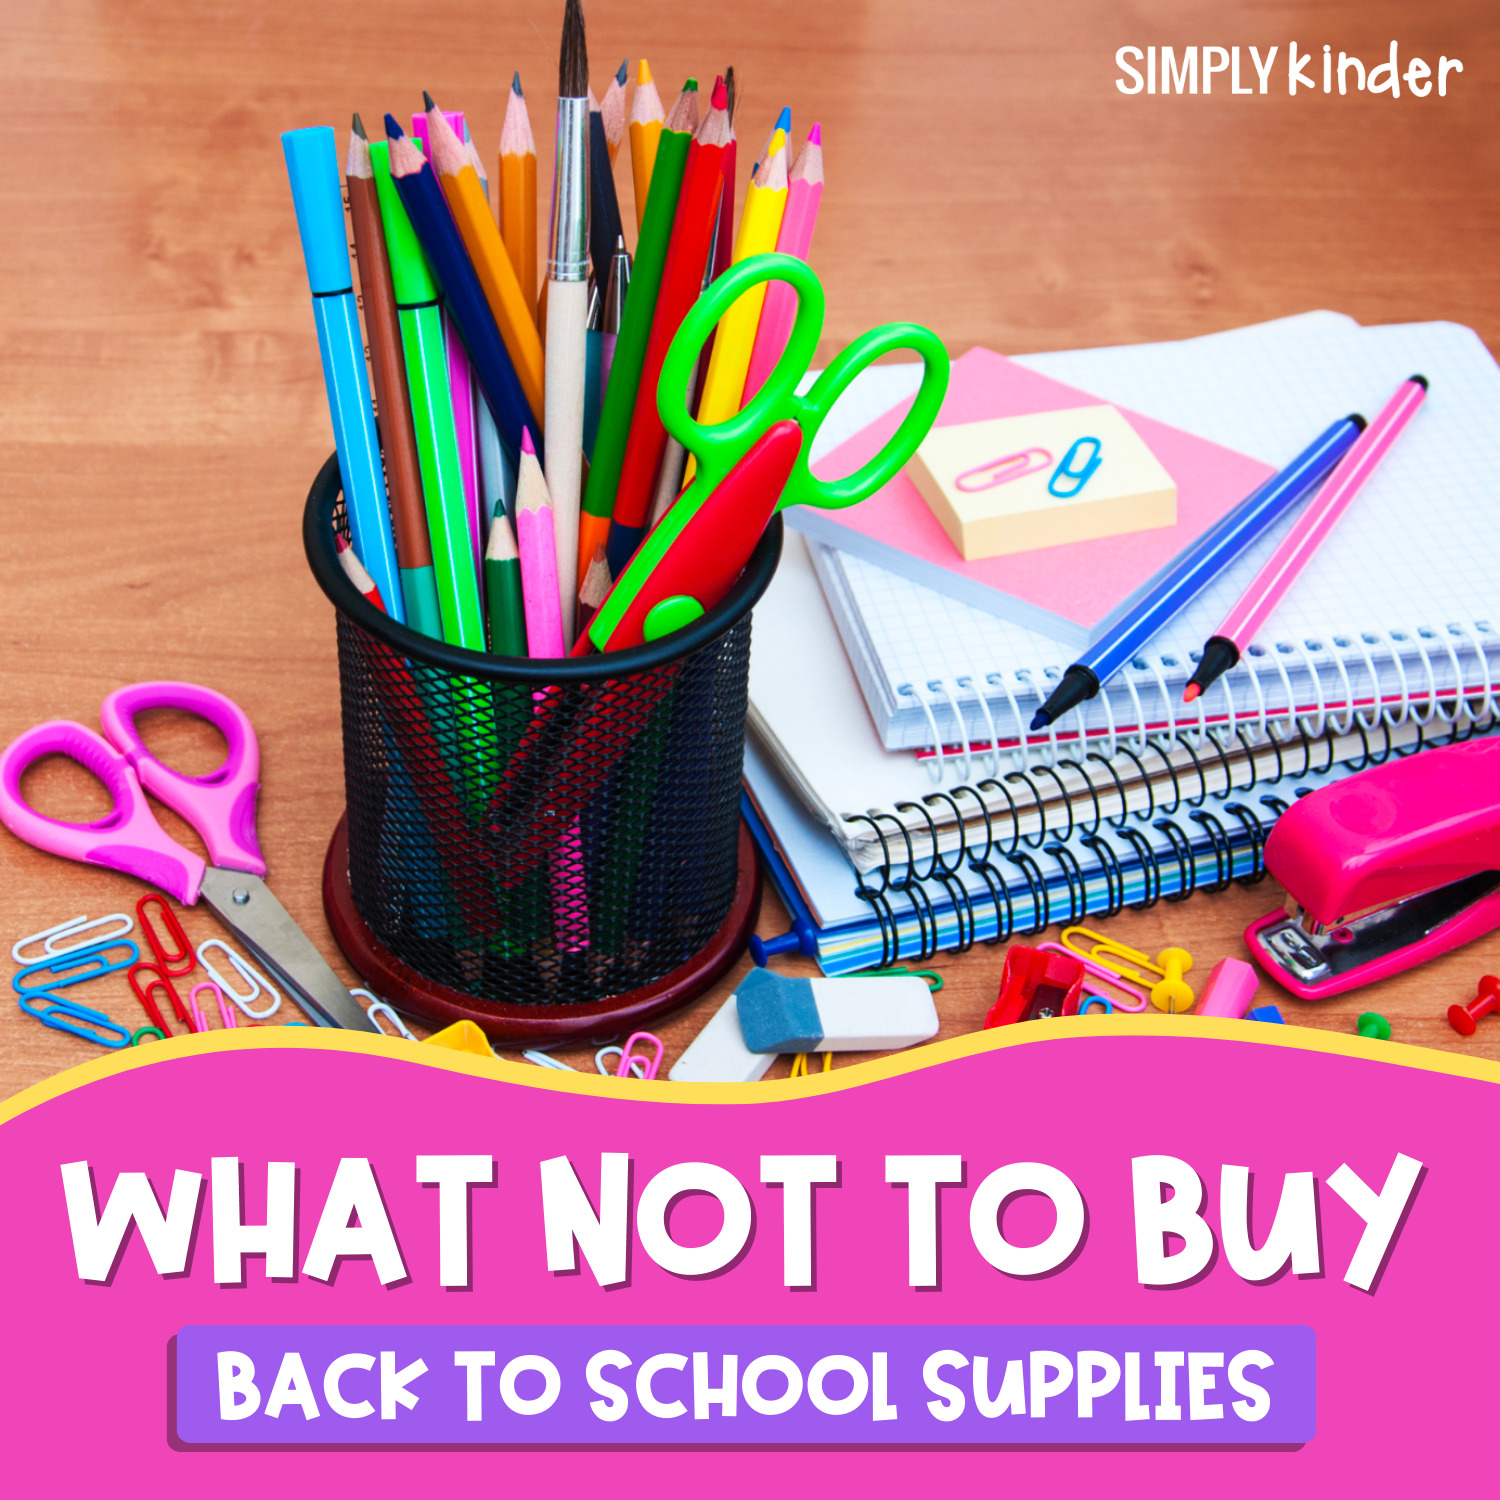 https://www.simplykinder.com/wp-content/uploads/2022/05/Do-NOT-Buy-These-Back-to-School-Supplies-For-Real.jpg